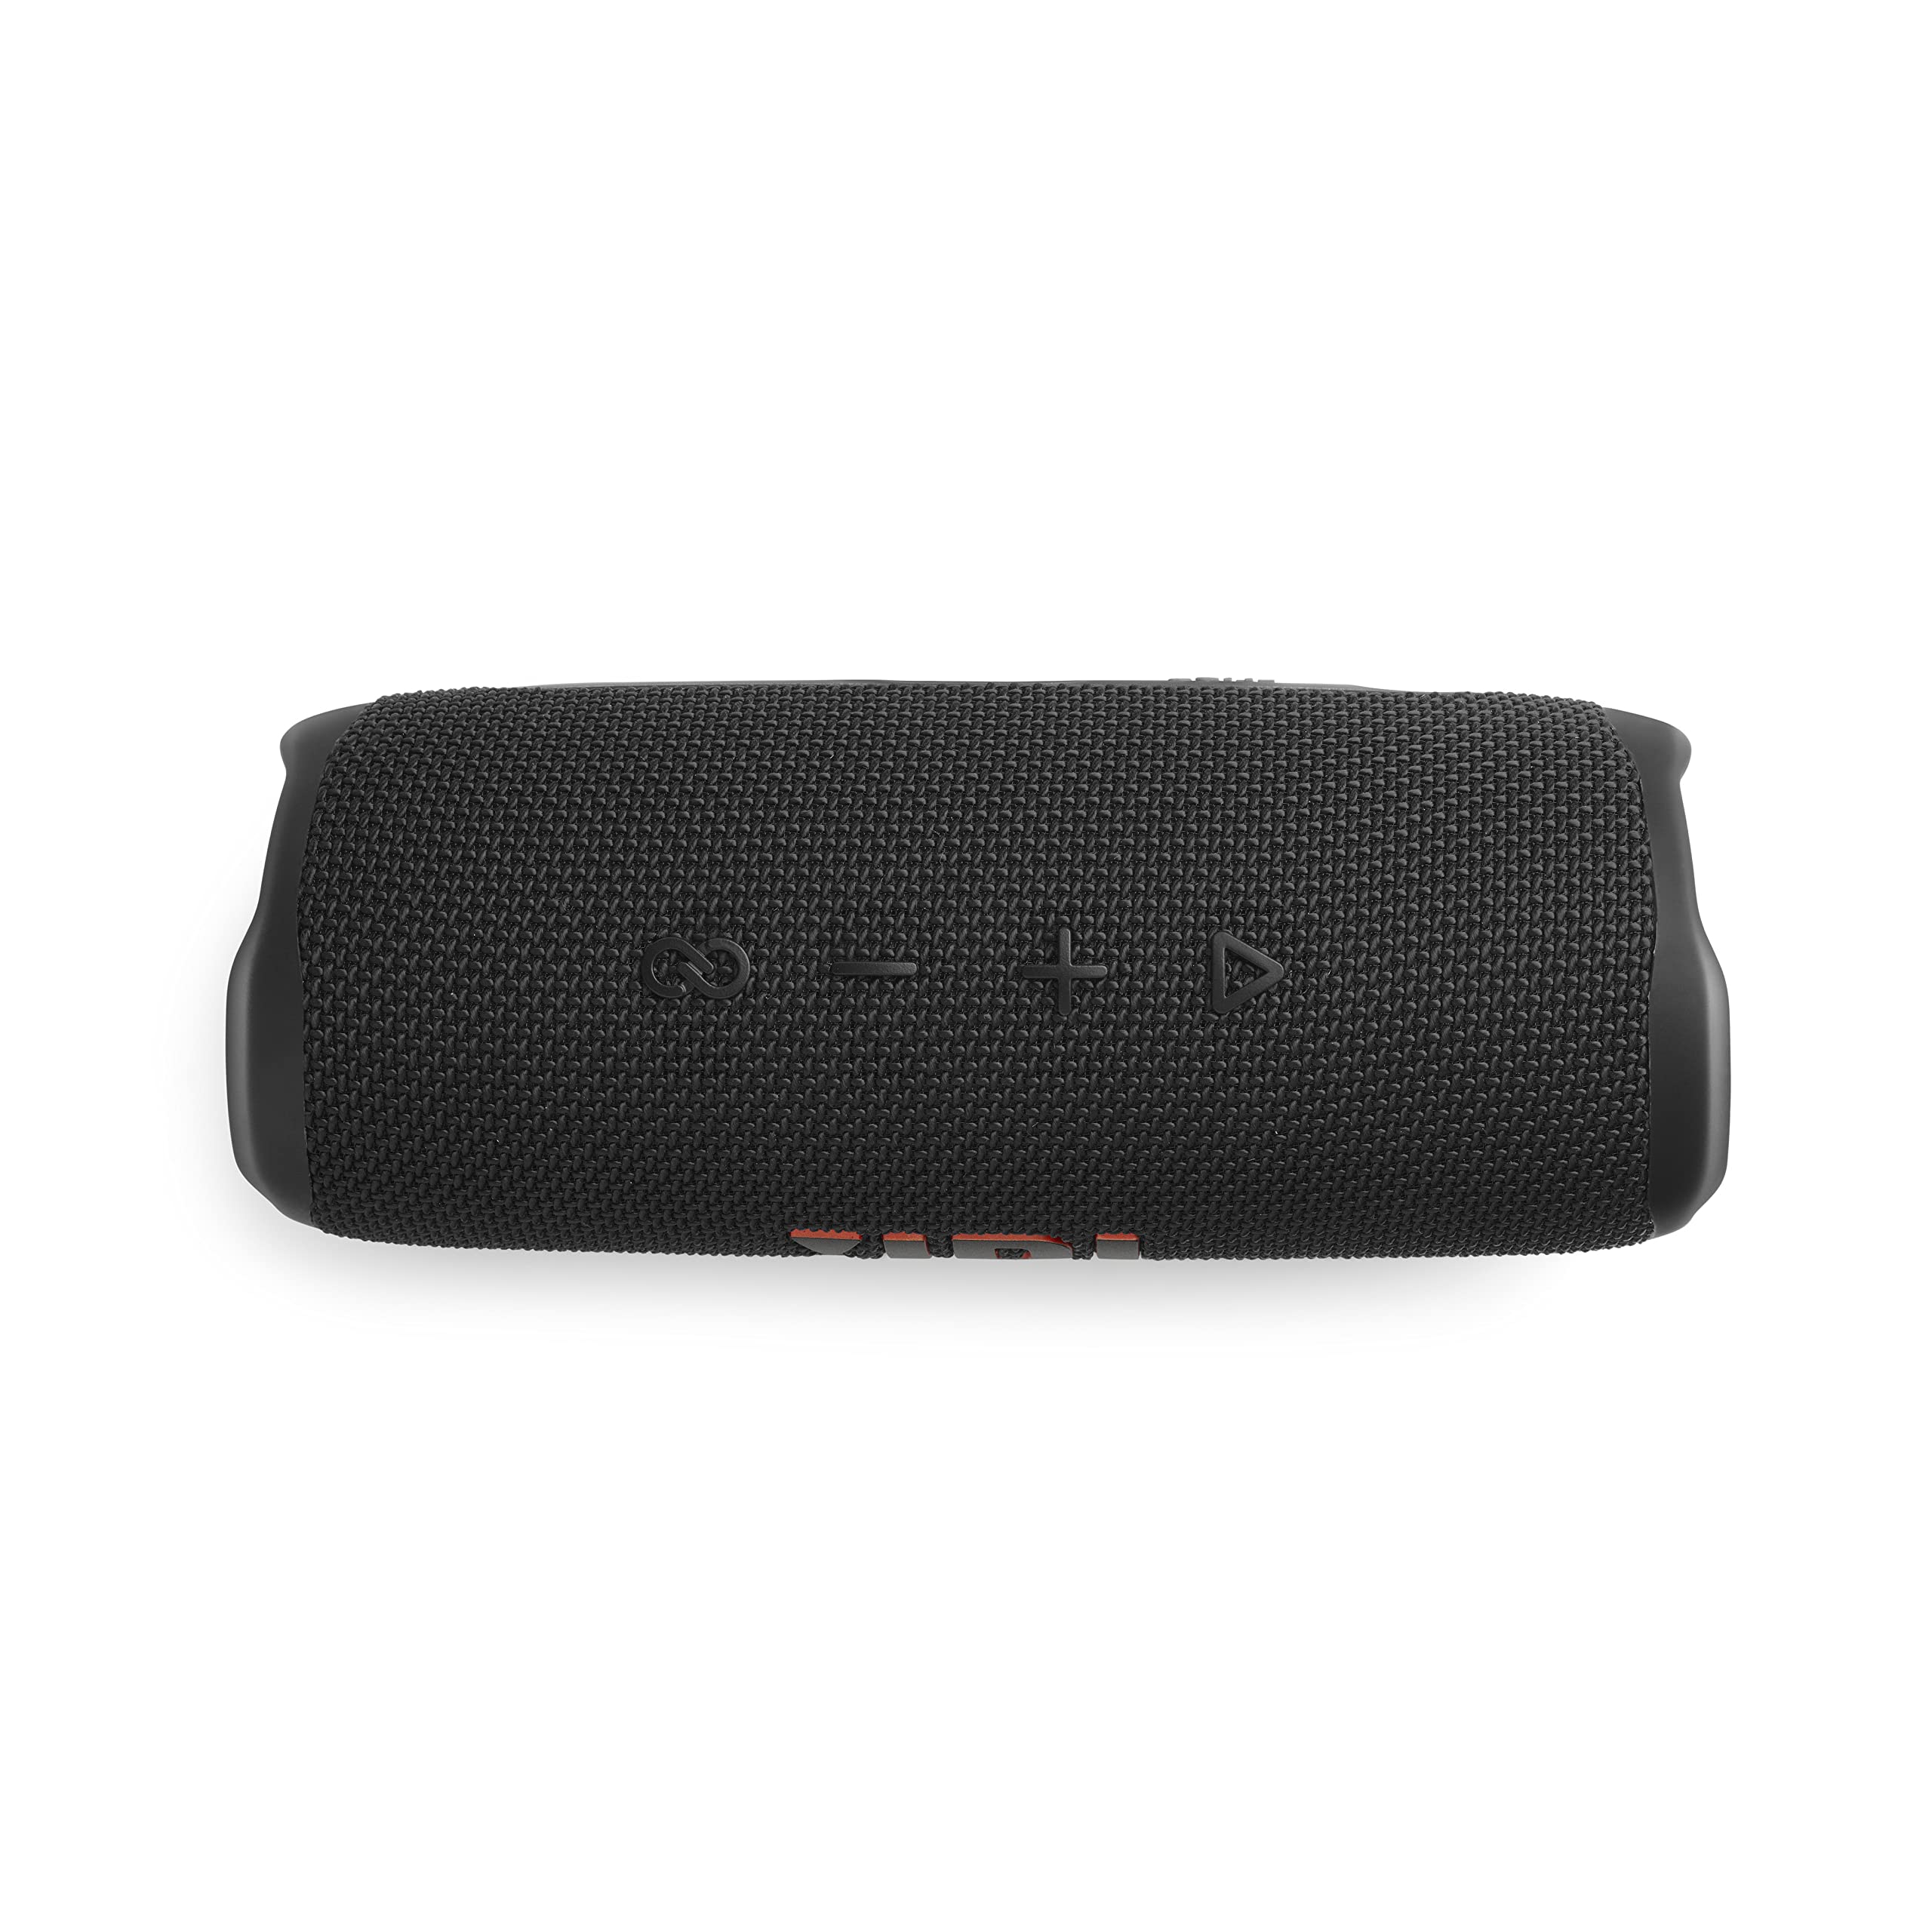 JBL Flip 6 - Portable Bluetooth Speaker, powerful sound and deep bass, IPX7 waterproof, 12 hours of playtime, JBL PartyBoost for multiple speaker pairing for home, outdoor and travel (Black)